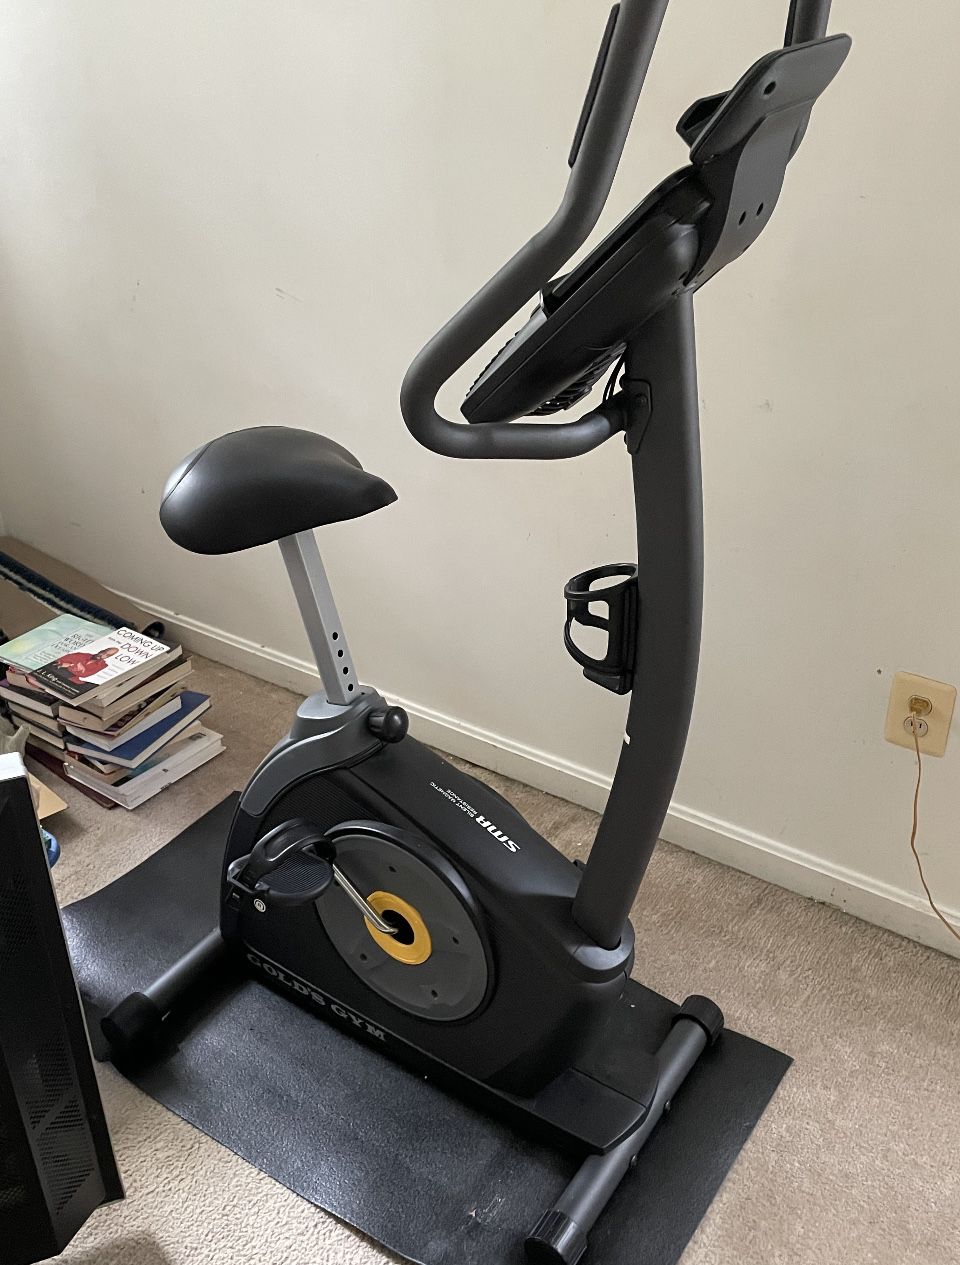 Golds Gym Cycle Trainer 300, Perfect Condition, Health, Workout Equipment, Bicycle, Gym